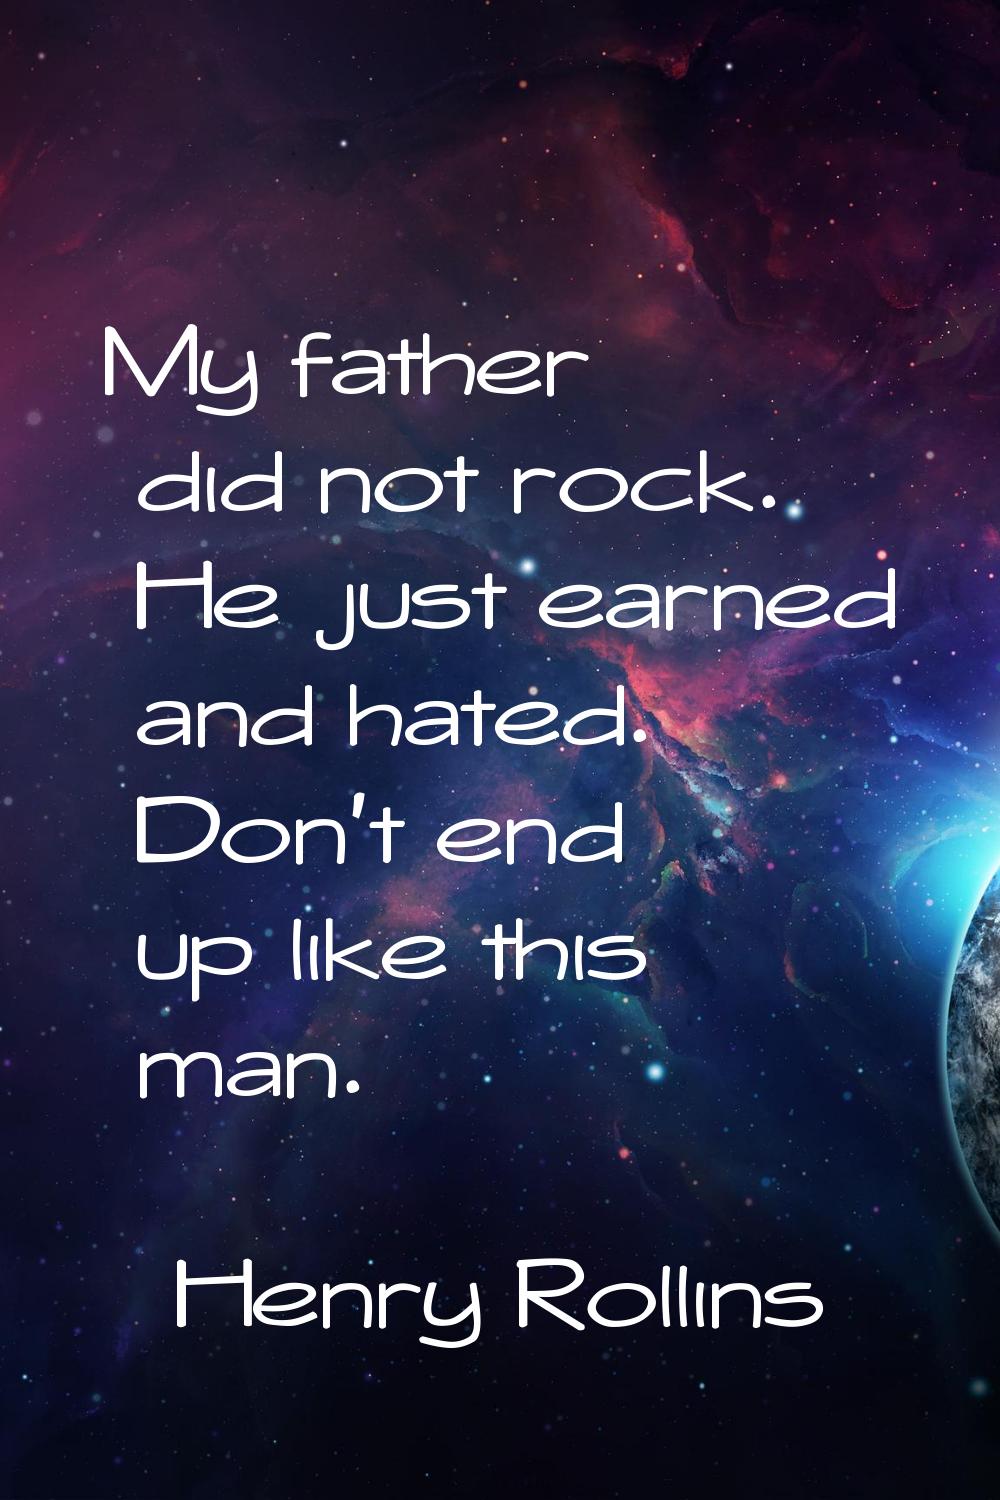 My father did not rock. He just earned and hated. Don't end up like this man.